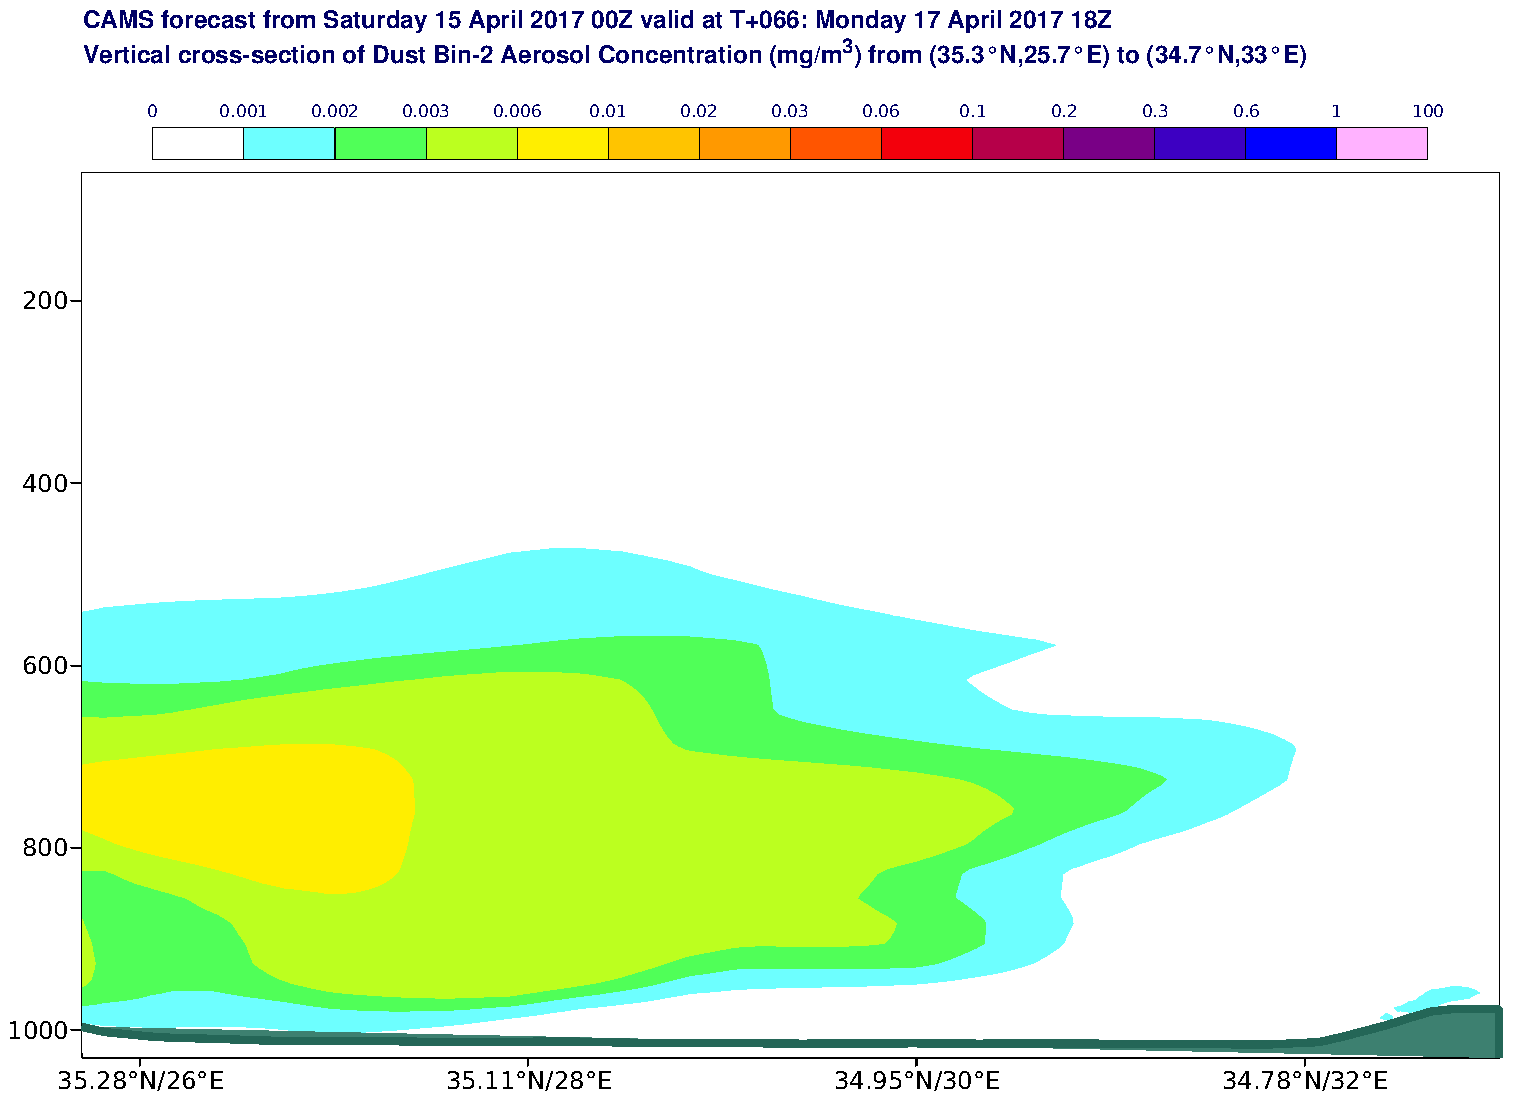 Vertical cross-section of Dust Bin-2 Aerosol Concentration (mg/m3) valid at T66 - 2017-04-17 18:00